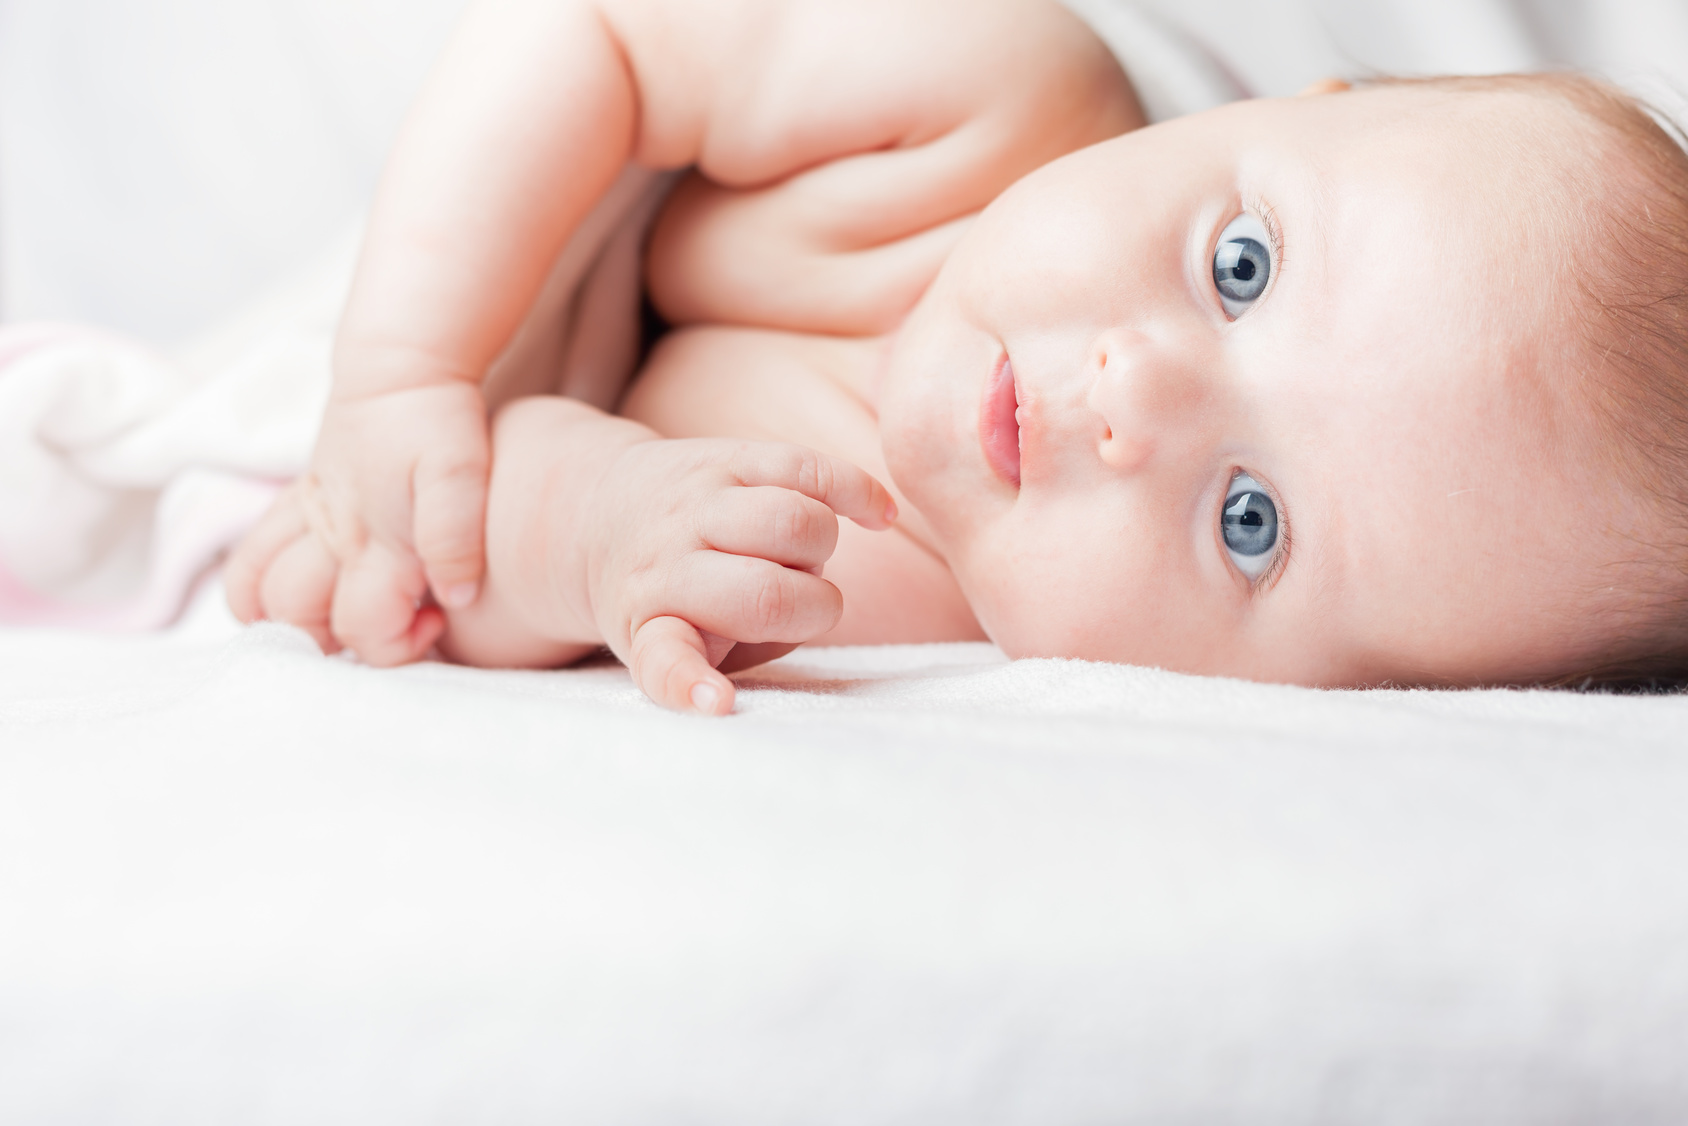 naps - a close up of a baby on their side looking at the camera - laying on a white blanket